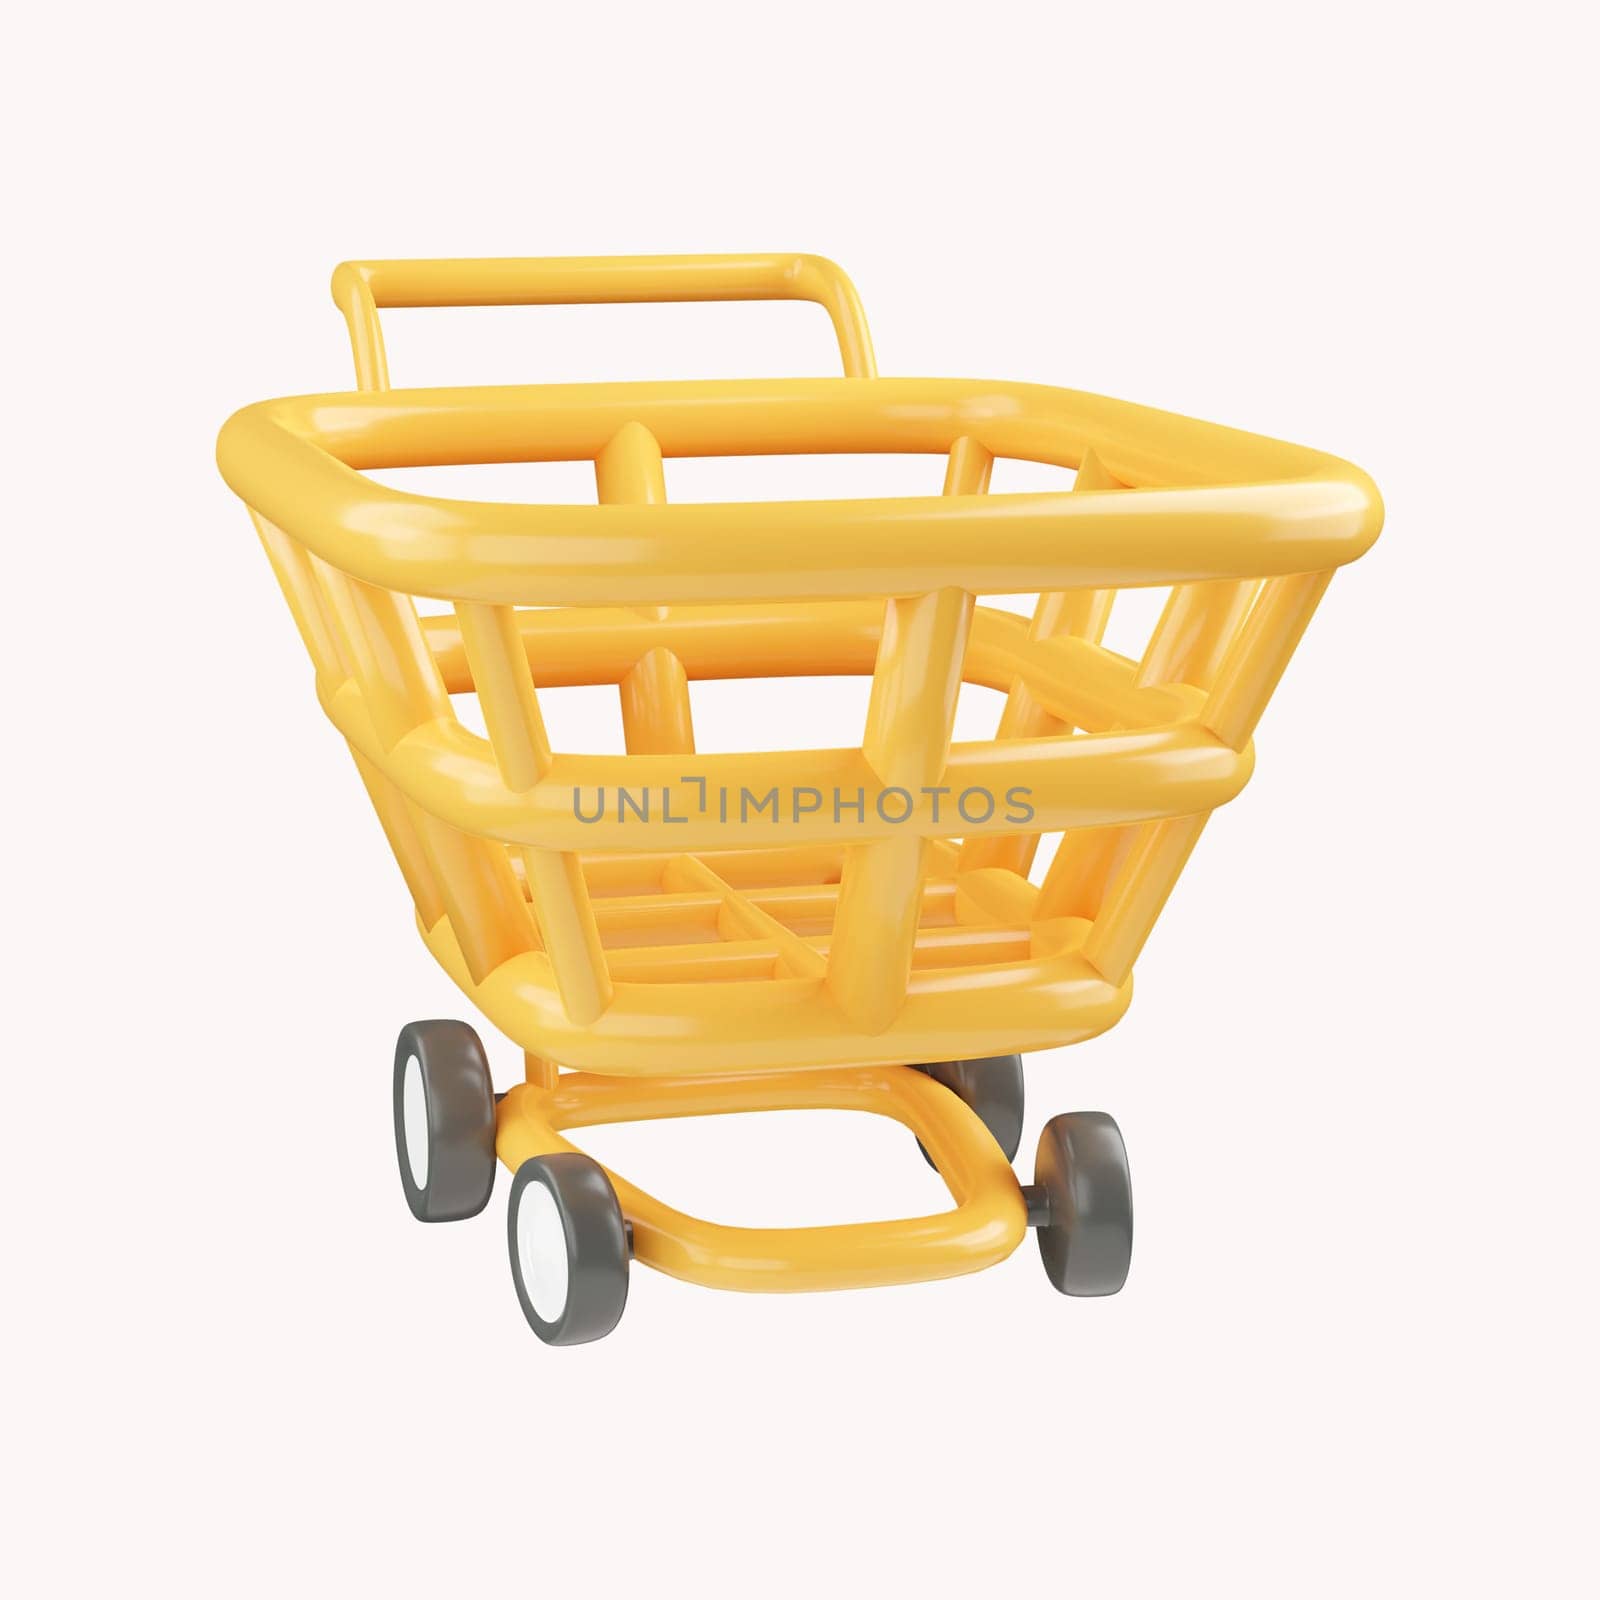 3D yellow shopping cart for online shopping and digital marketing ideas on white isolate background.